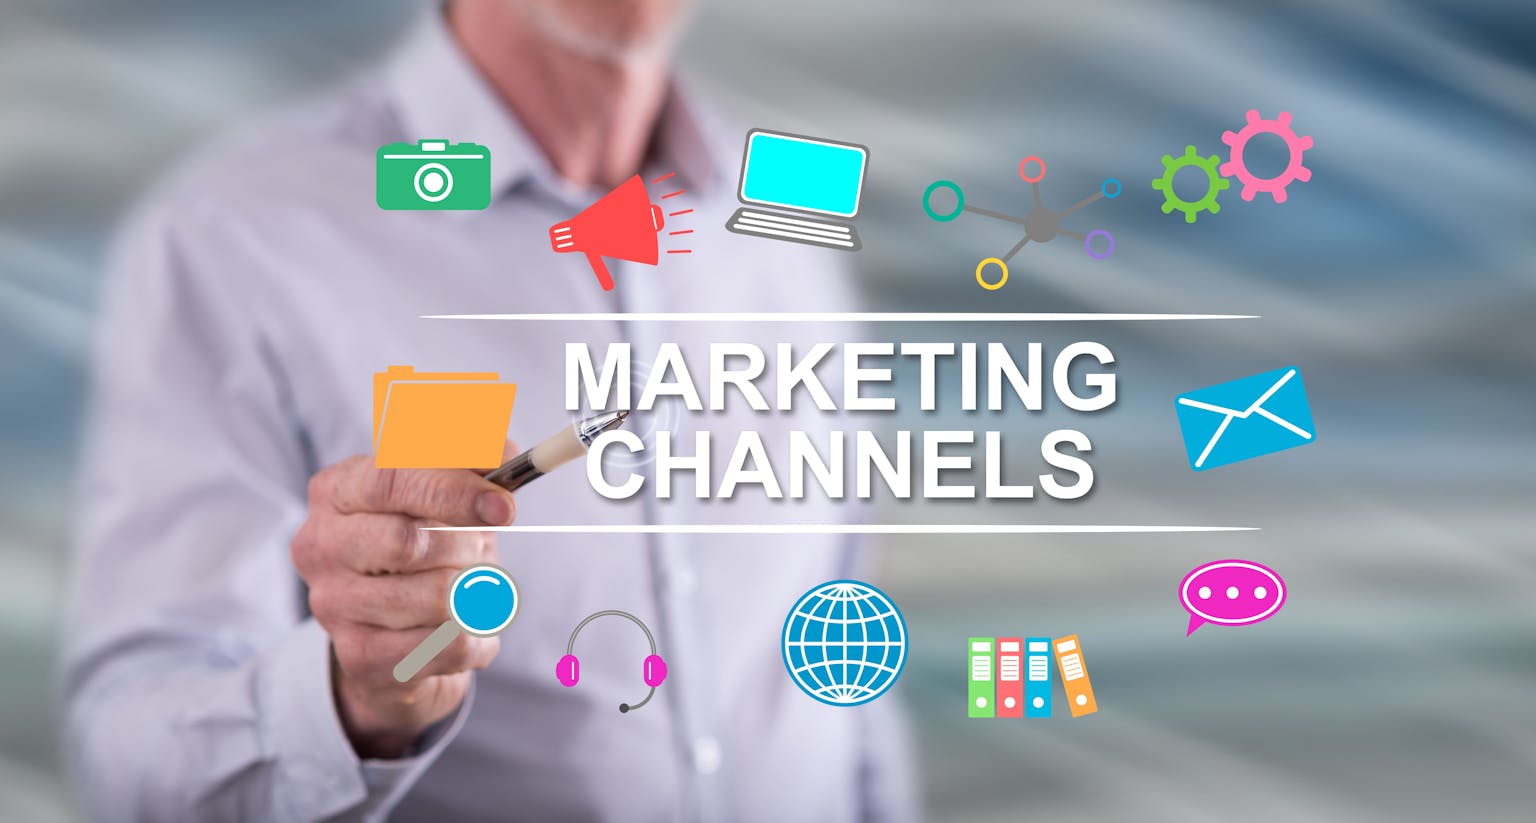 Use you Marketing channels